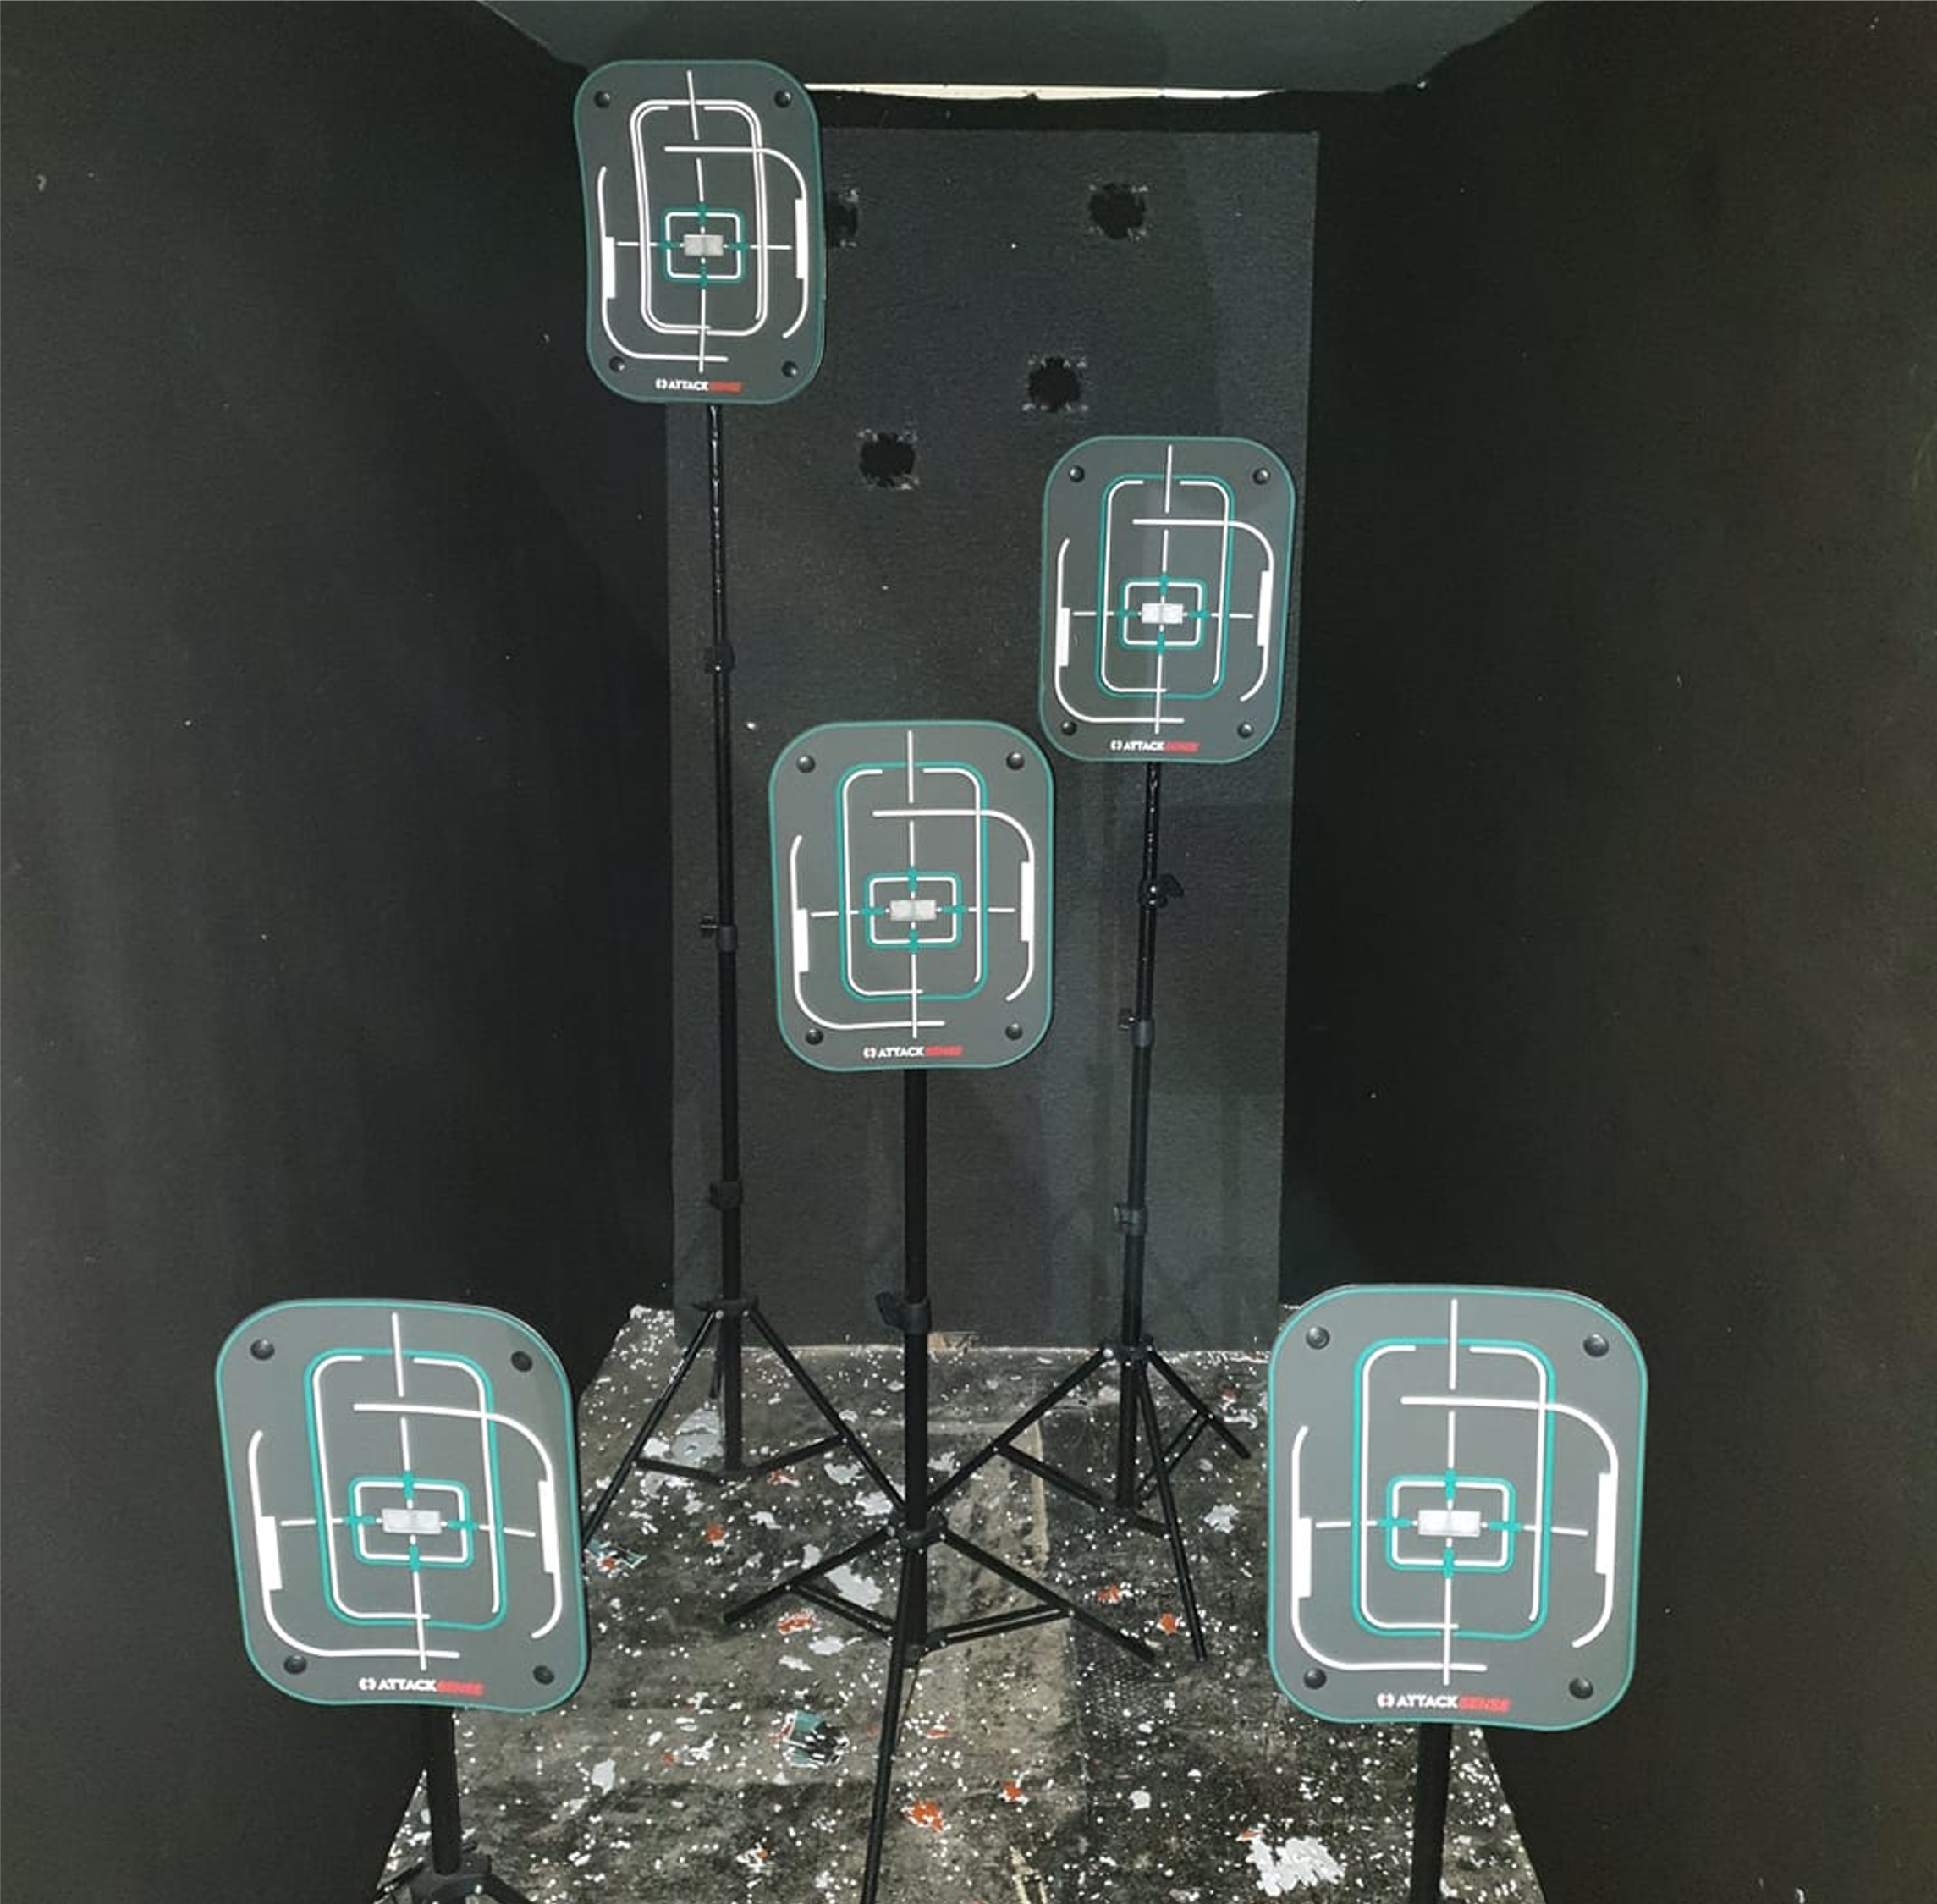 Our Attack Sense Target System